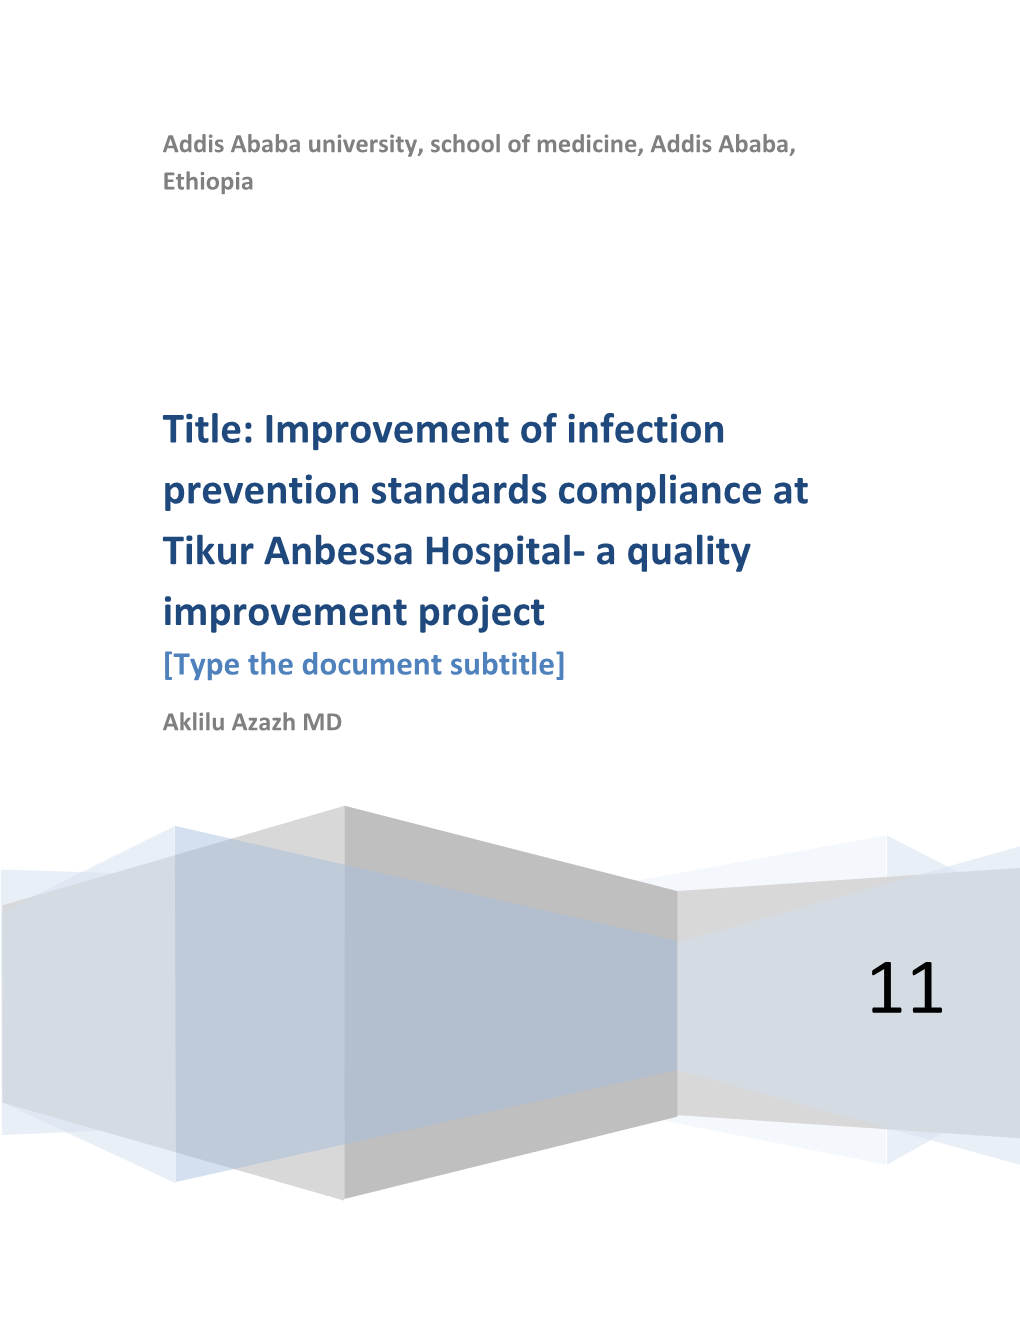 Title: Improvement of Infection Prevention Standards Compliance at Tikur Anbessa Hospital